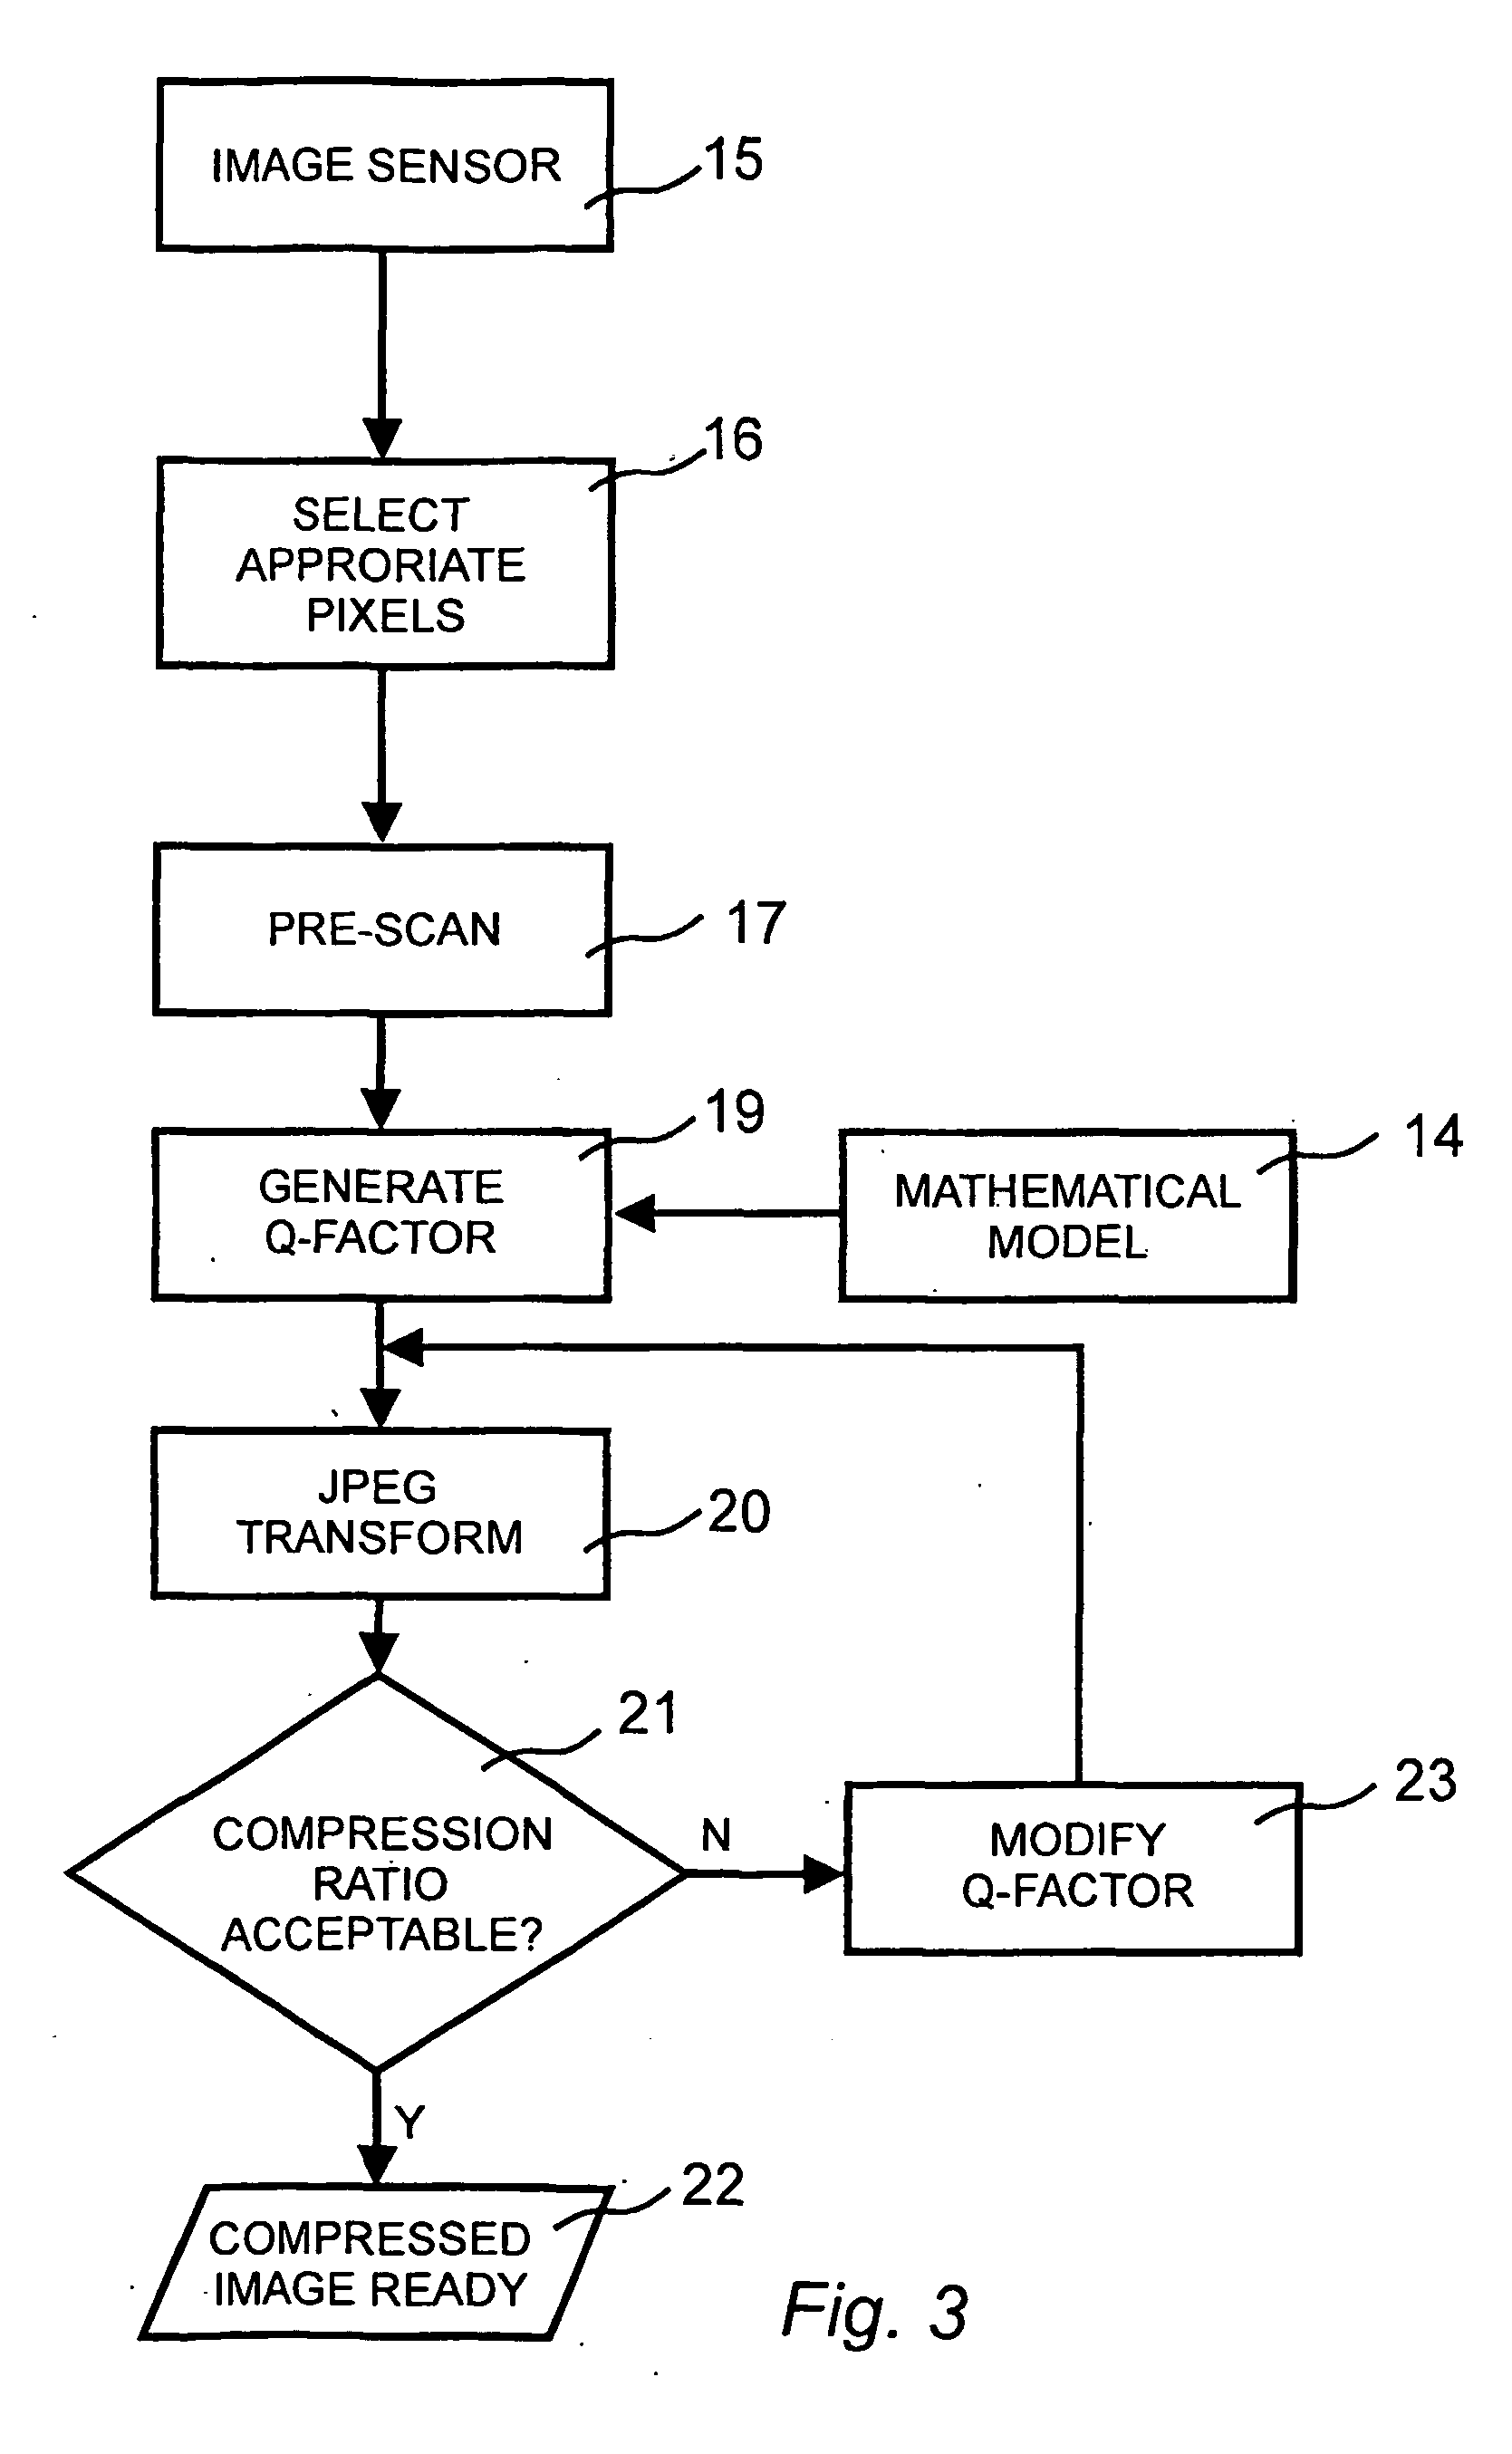 Method for compressing digital images to a predetermined size by calculating an optimal quality factor